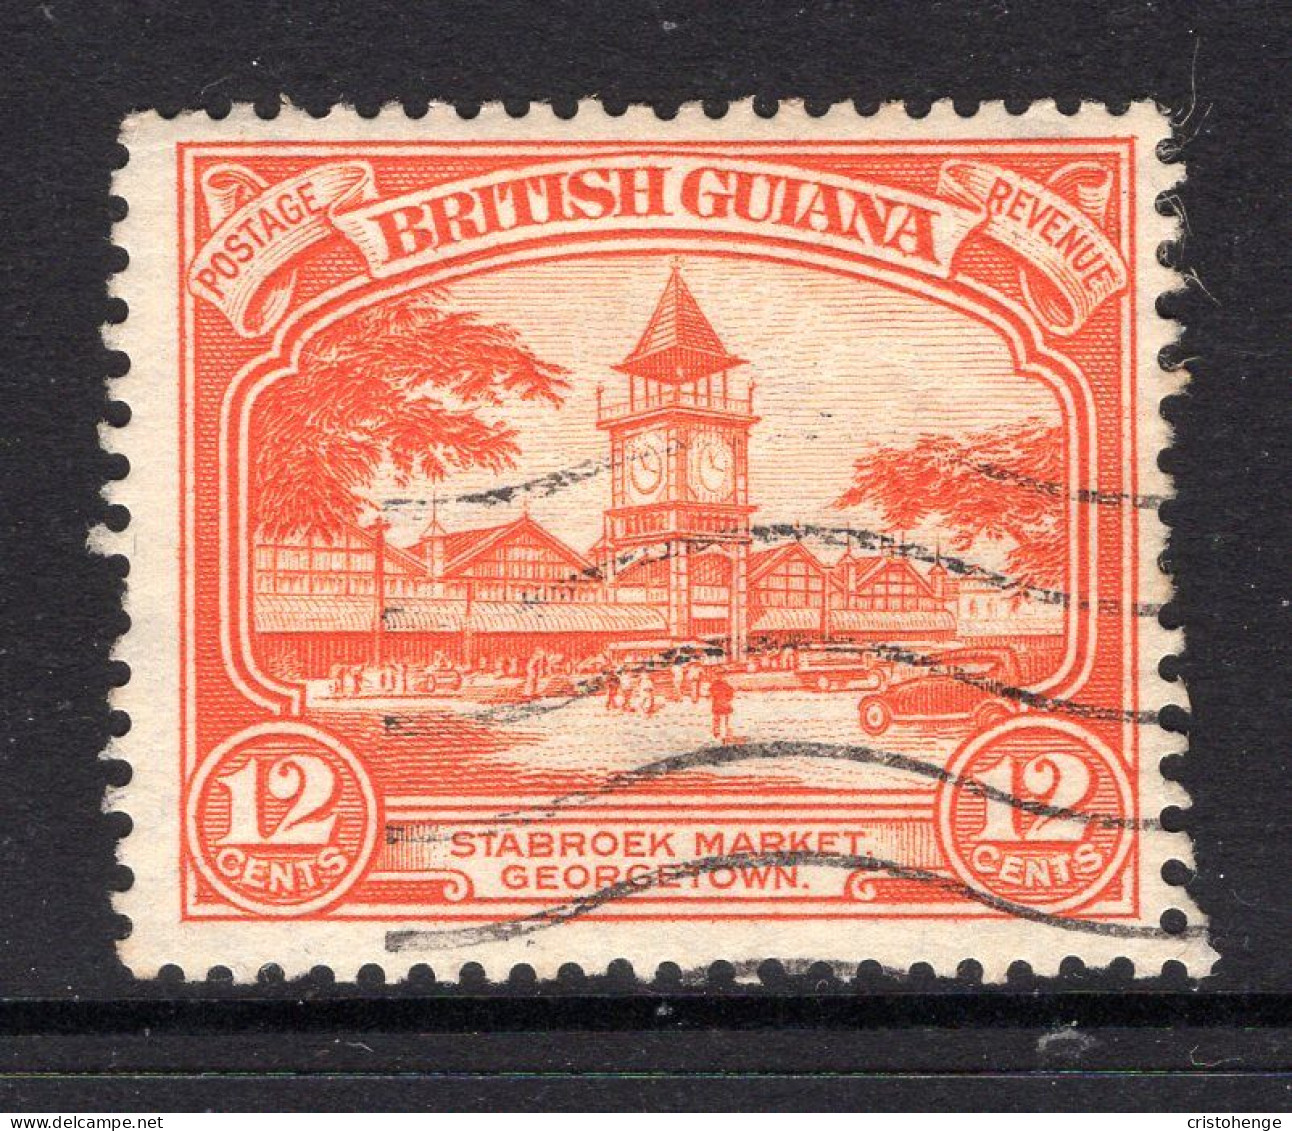 British Guiana 1934-51 KGV Pictorials - 12c Stabroek Market - P.12½ - Used (SG 293) - Guayana Británica (...-1966)